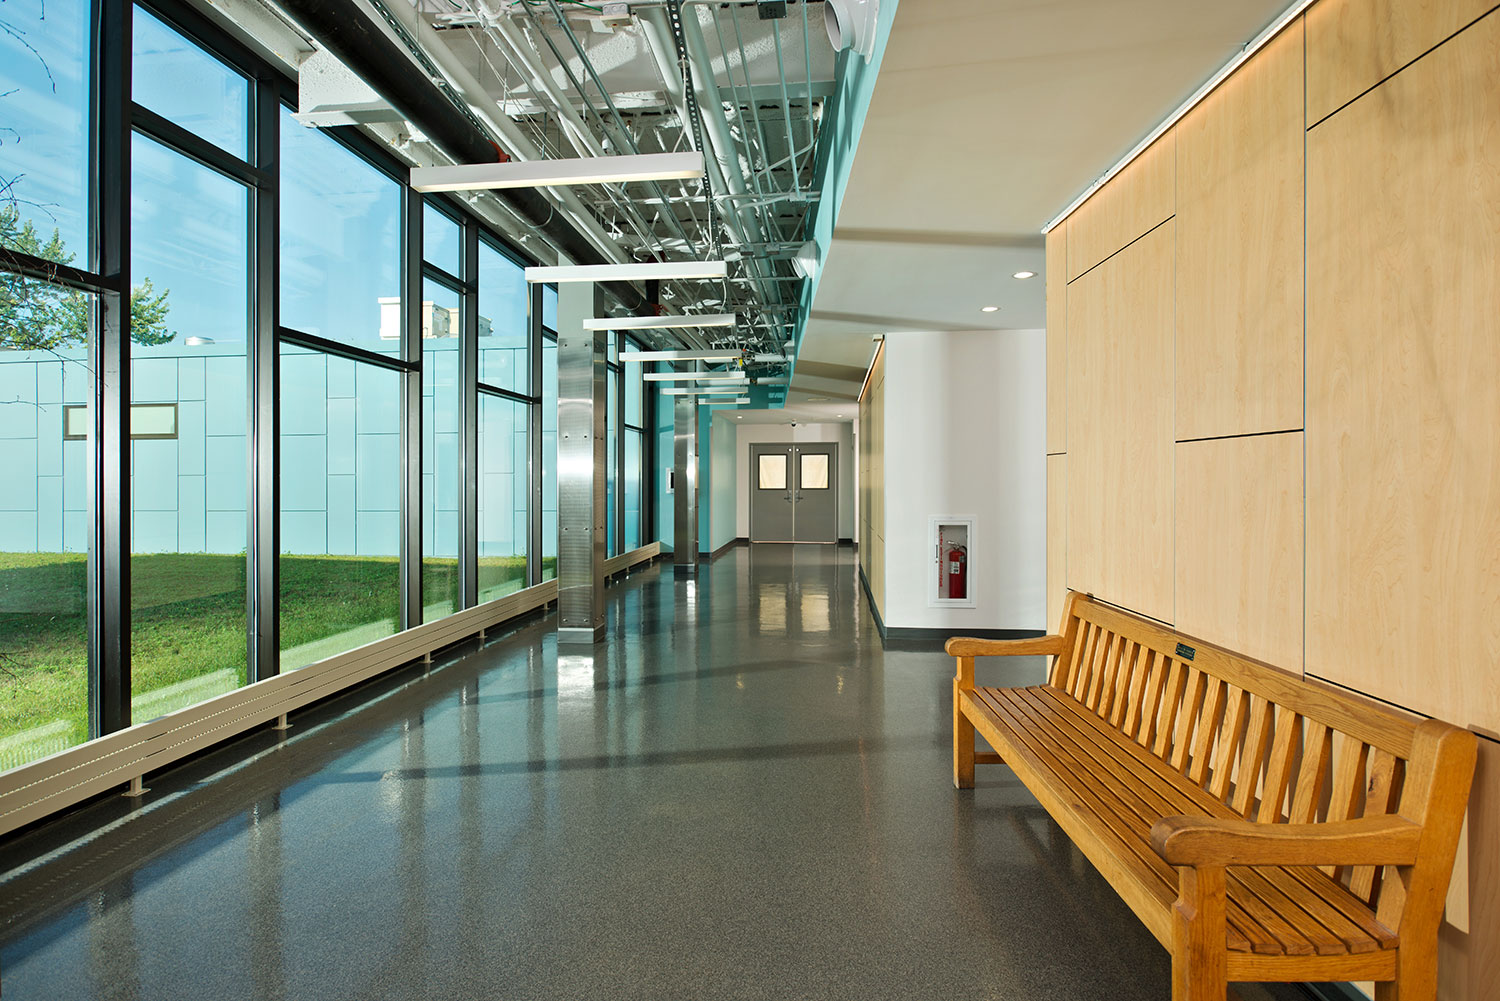 Naturally lit interior hallway. The 168,000-square-foot renovation includes new classrooms, technology labs, operational support spaces and administrative offices, as well as mechanical, electrical, plumbing and fire systems.